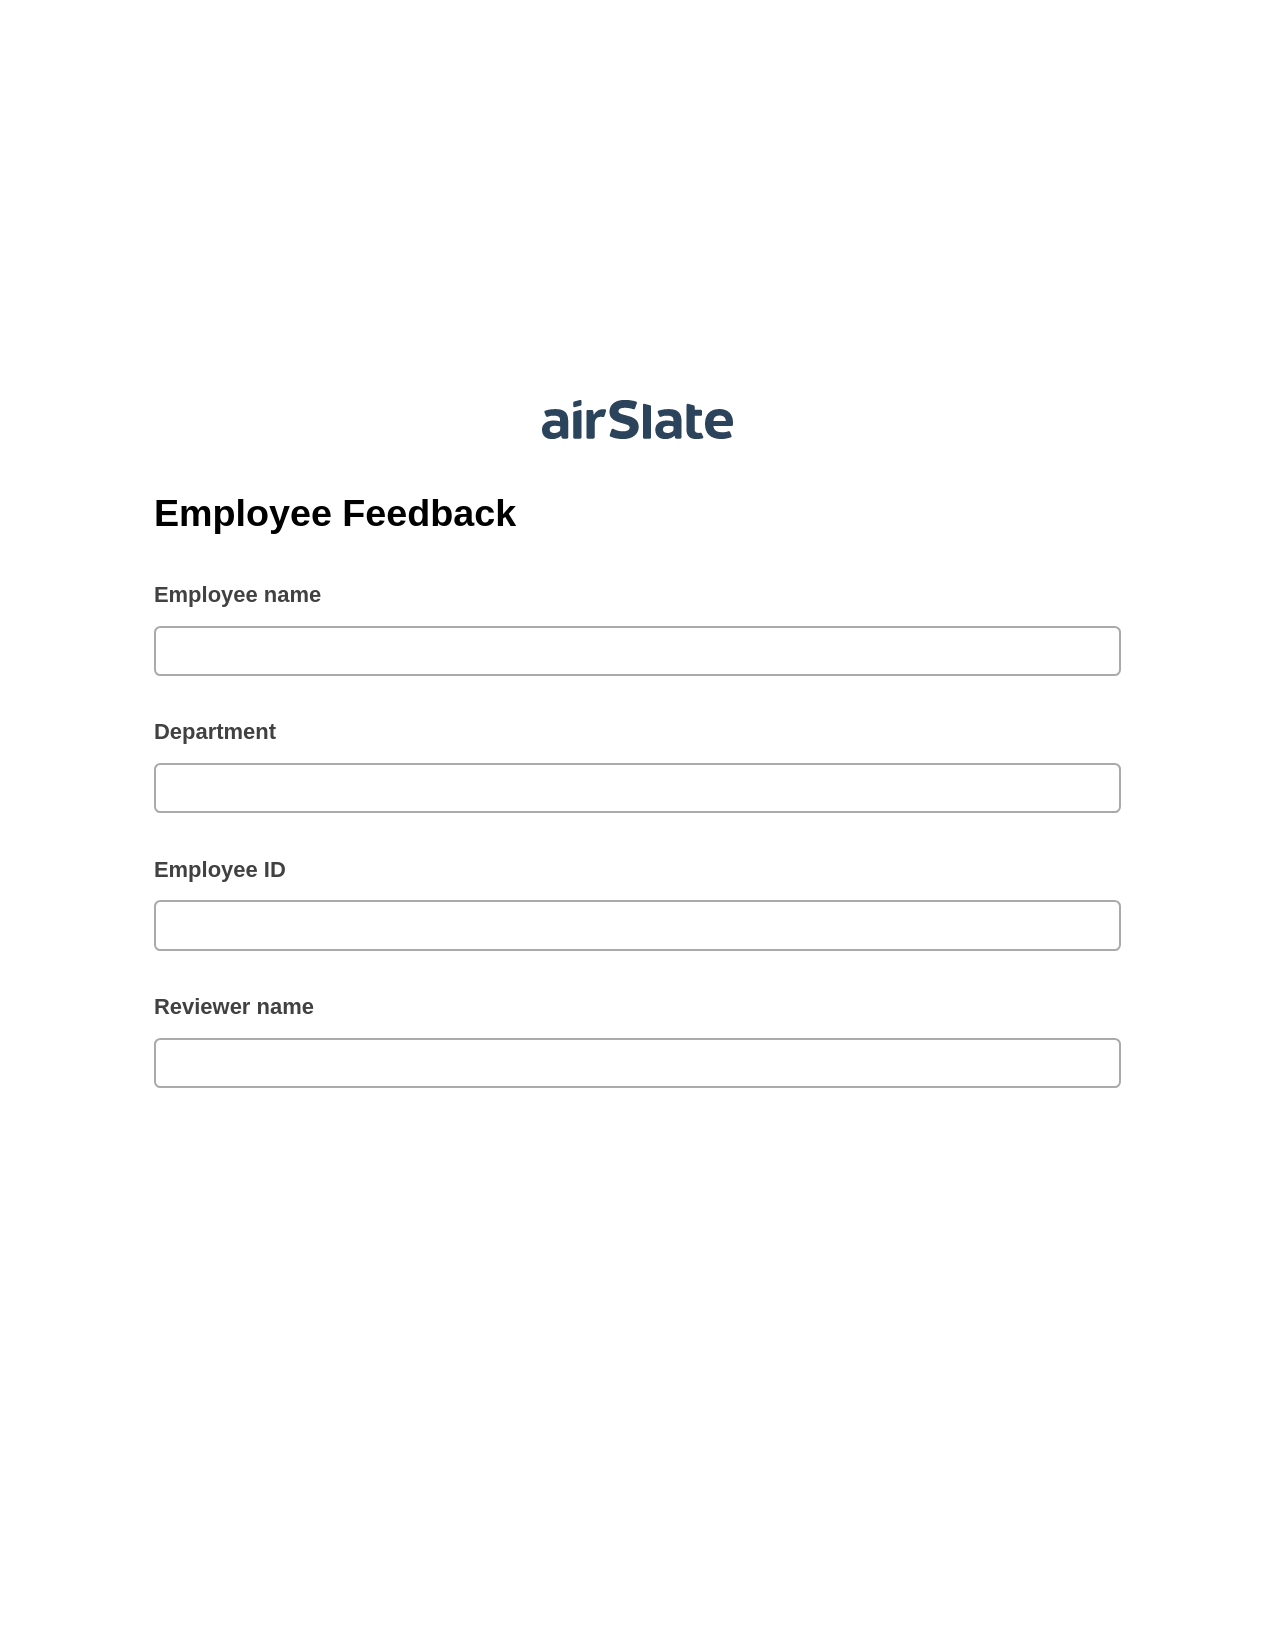 Employee Feedback Pre-fill from Salesforce Records with SOQL Bot, SendGrid send Campaign bot, Archive to SharePoint Folder Bot